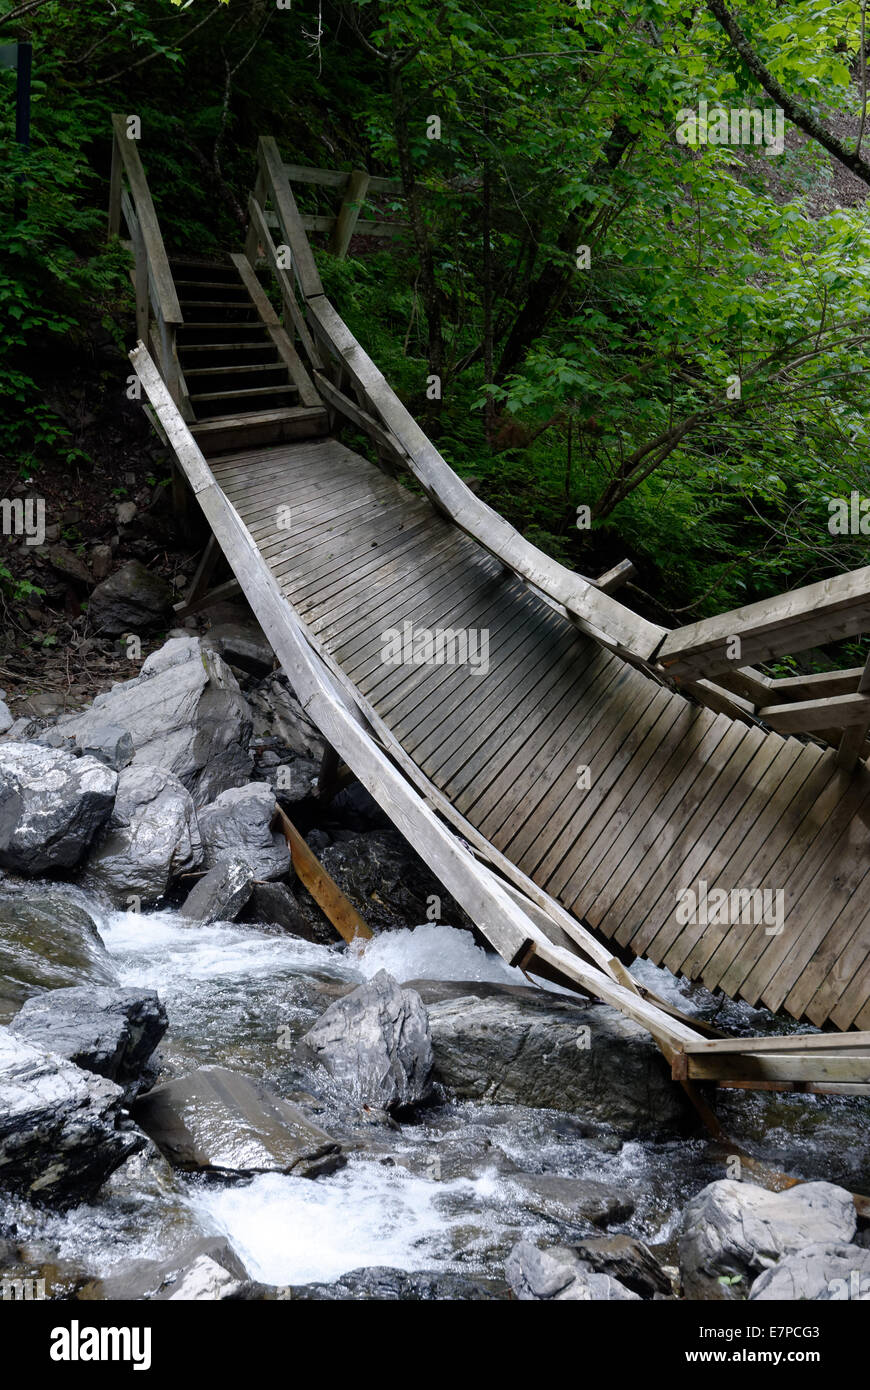 A wooden bridge destroyed by floodwater in the river, Gaspesie, Quebec, Canada Stock Photo